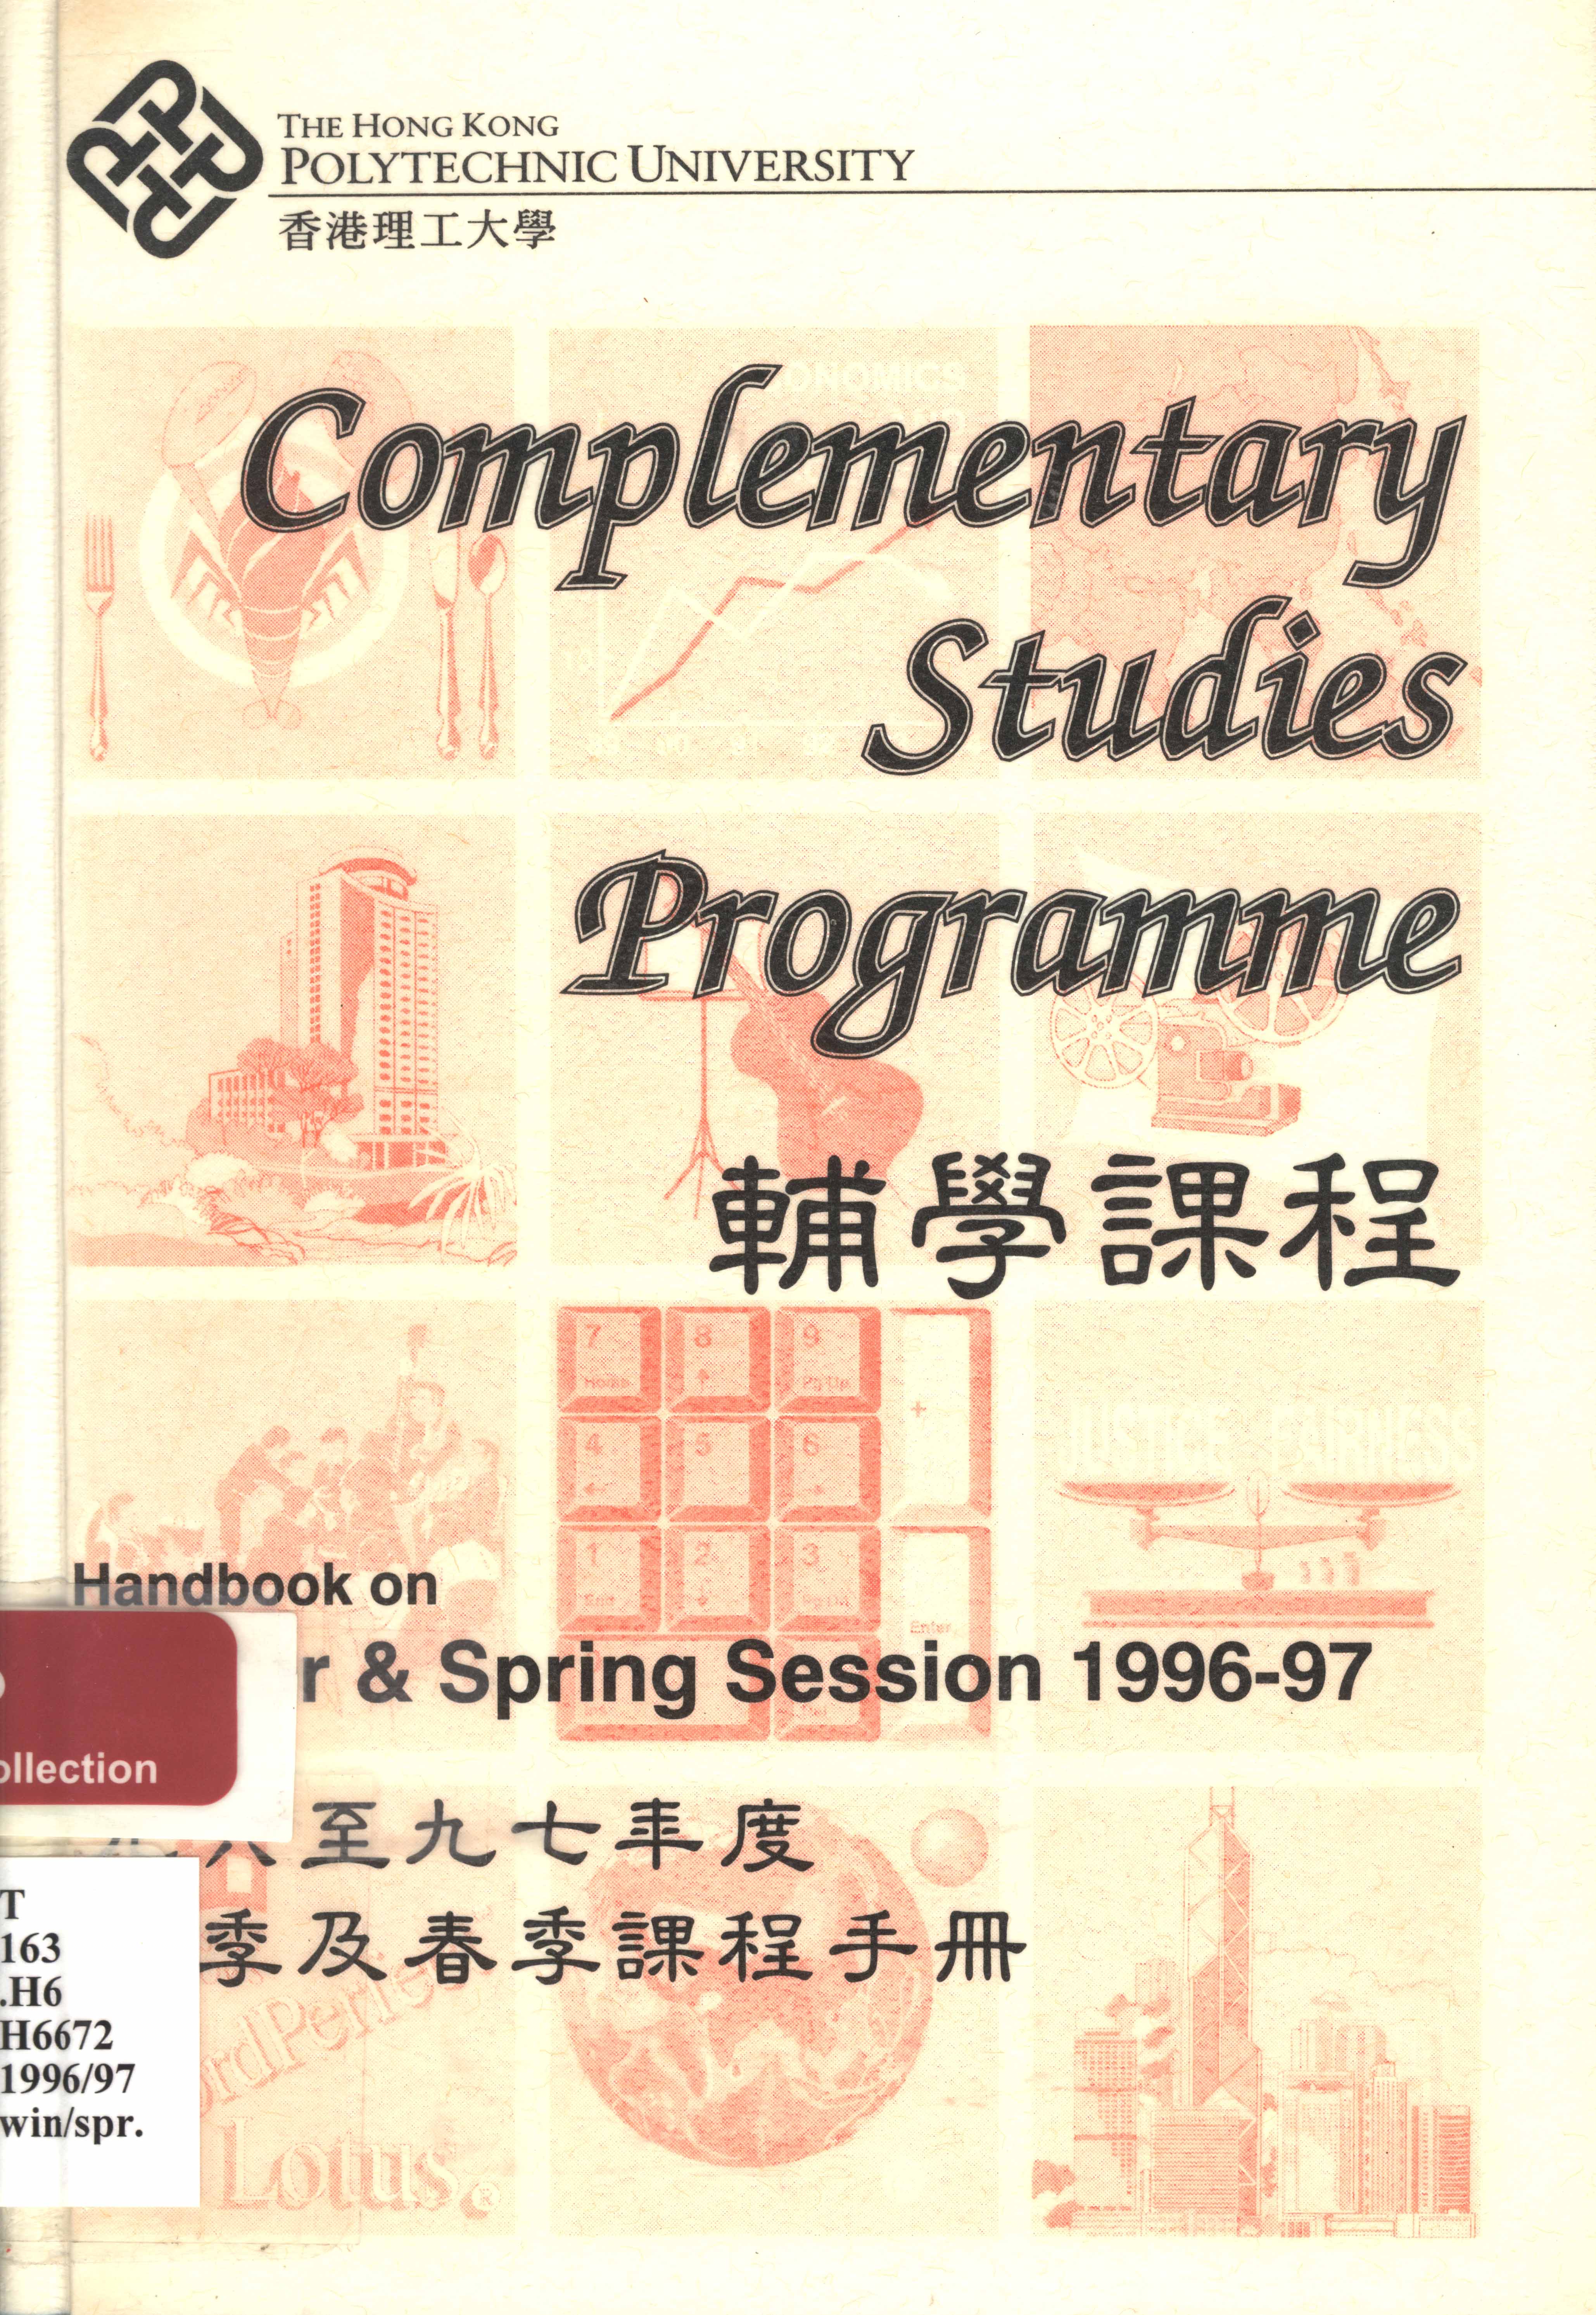 Complementary studies programme handbook on Winter & Spring session 1996-97